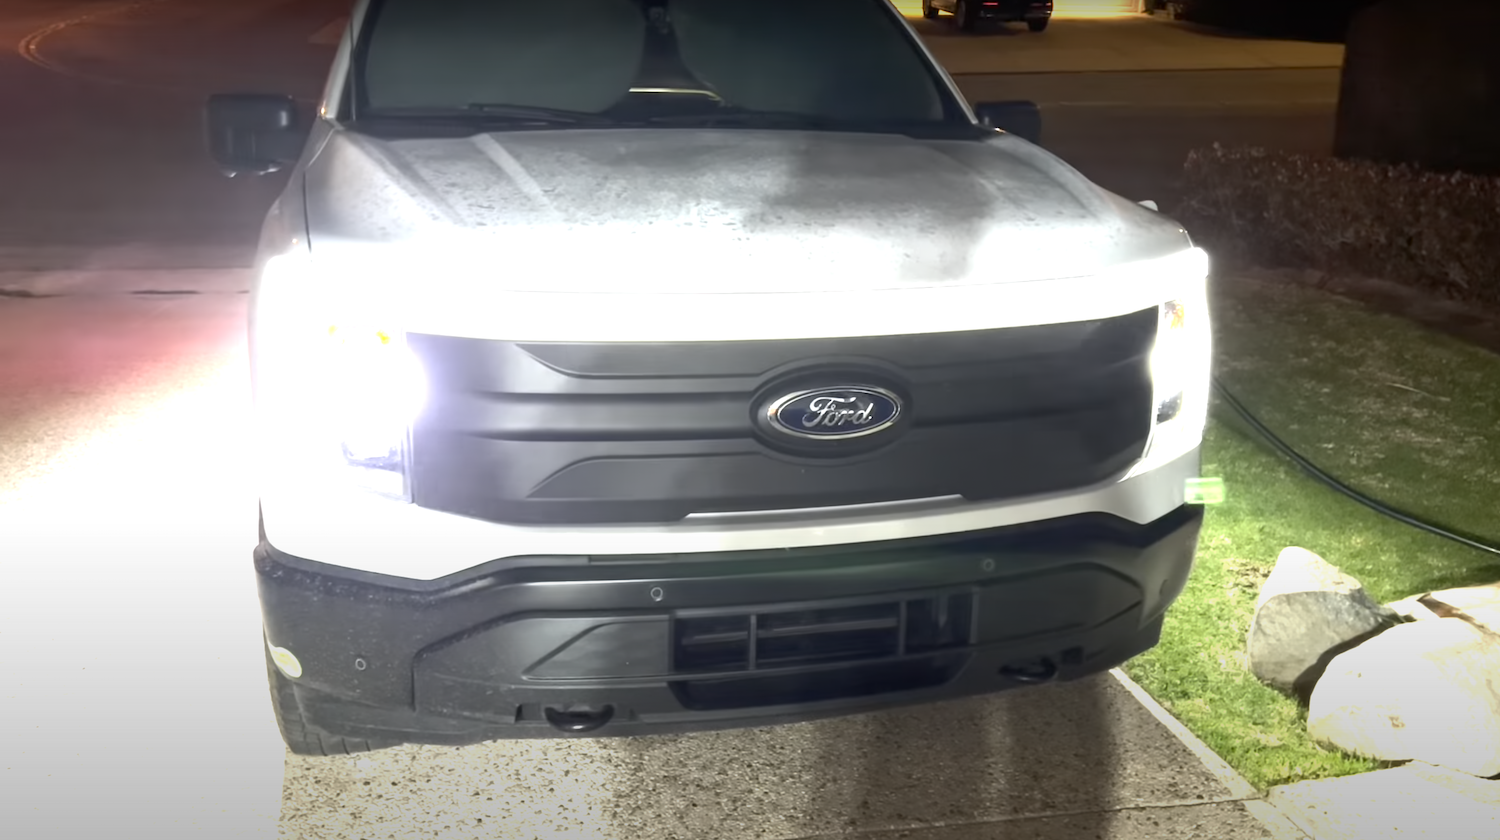 Ford F-150 Electric Pickup Truck To Feature Massive Front Light Bar